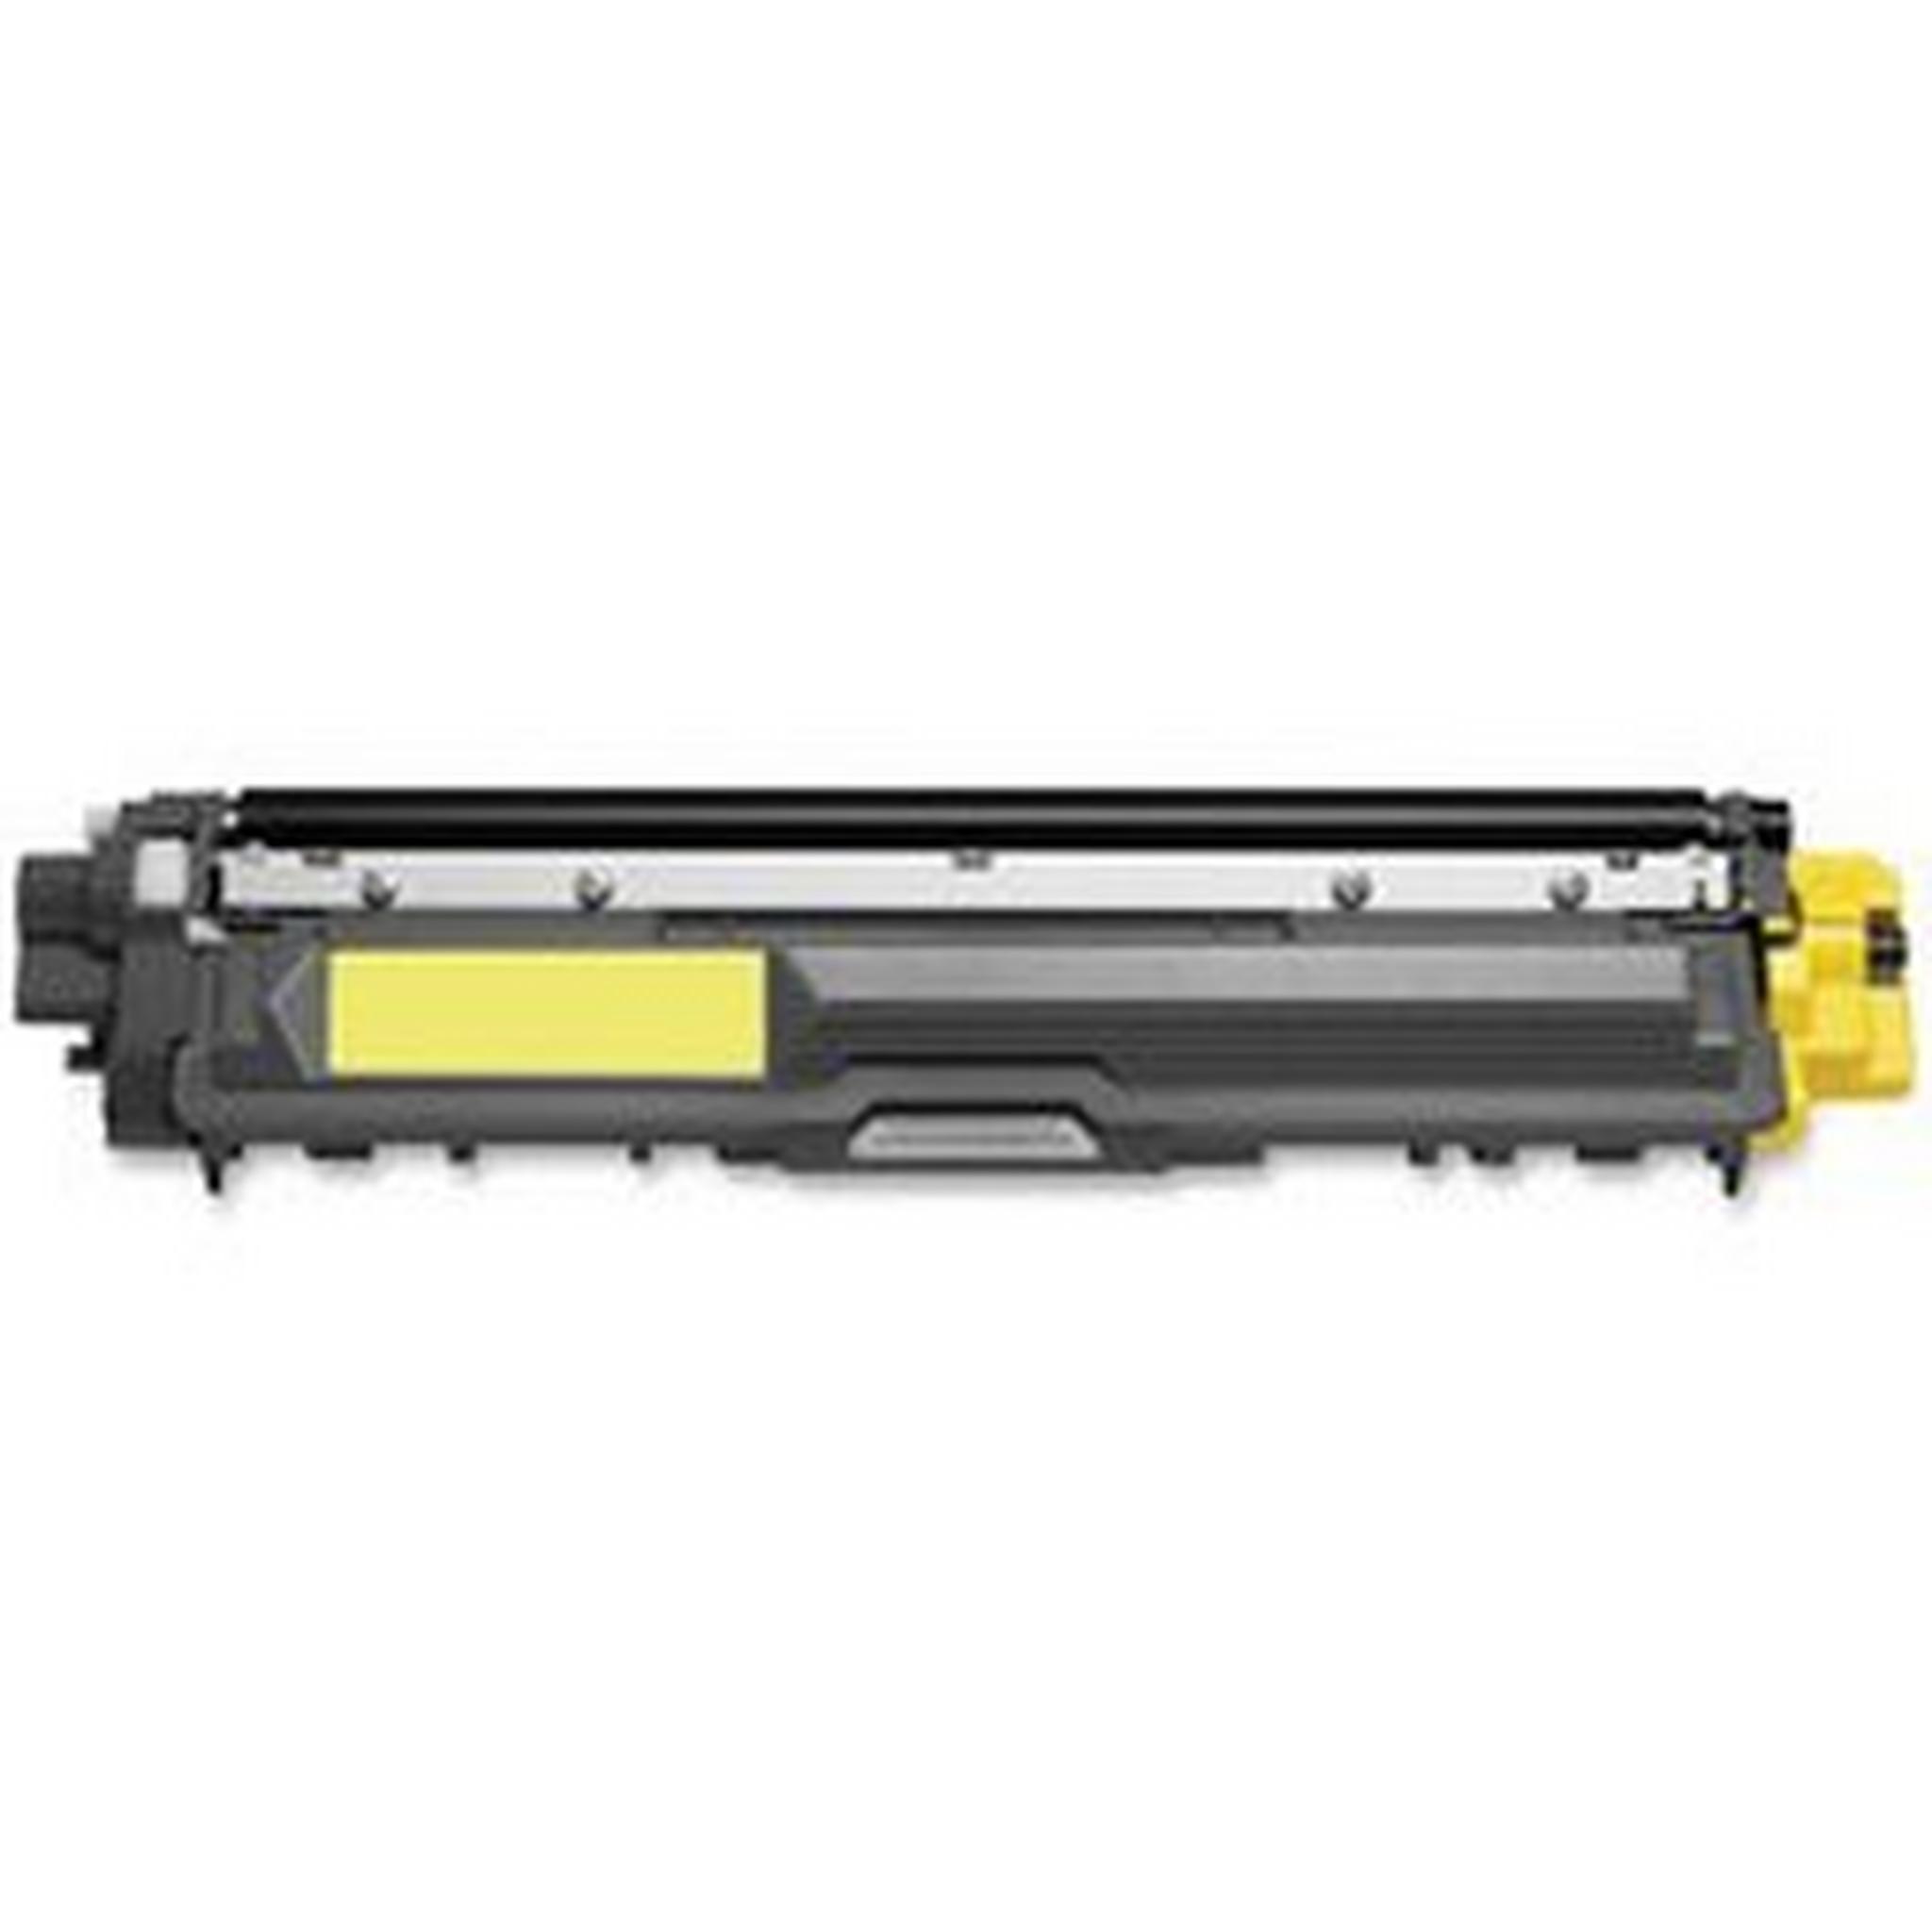 BROTHER Toner TN261Y for LaserJet Printing 1400 Page Yield - Yellow (Single Colour Pack)